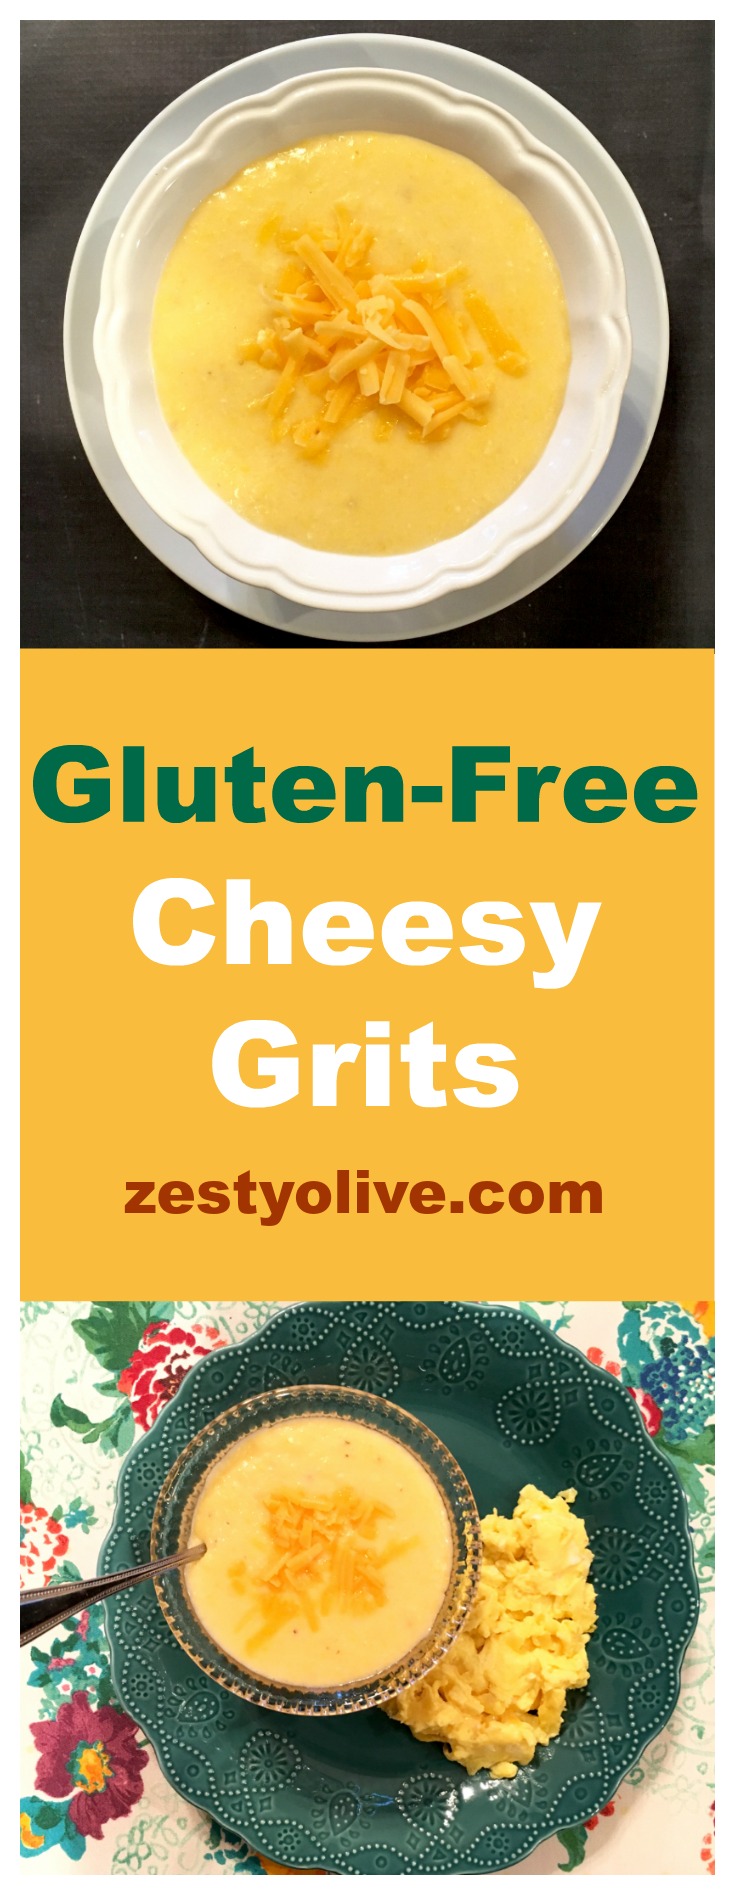 Calling all southerners, cheese lovers, and grits lovers: behold; here's the gluten-free cheesy grits recipe that you've been craving.